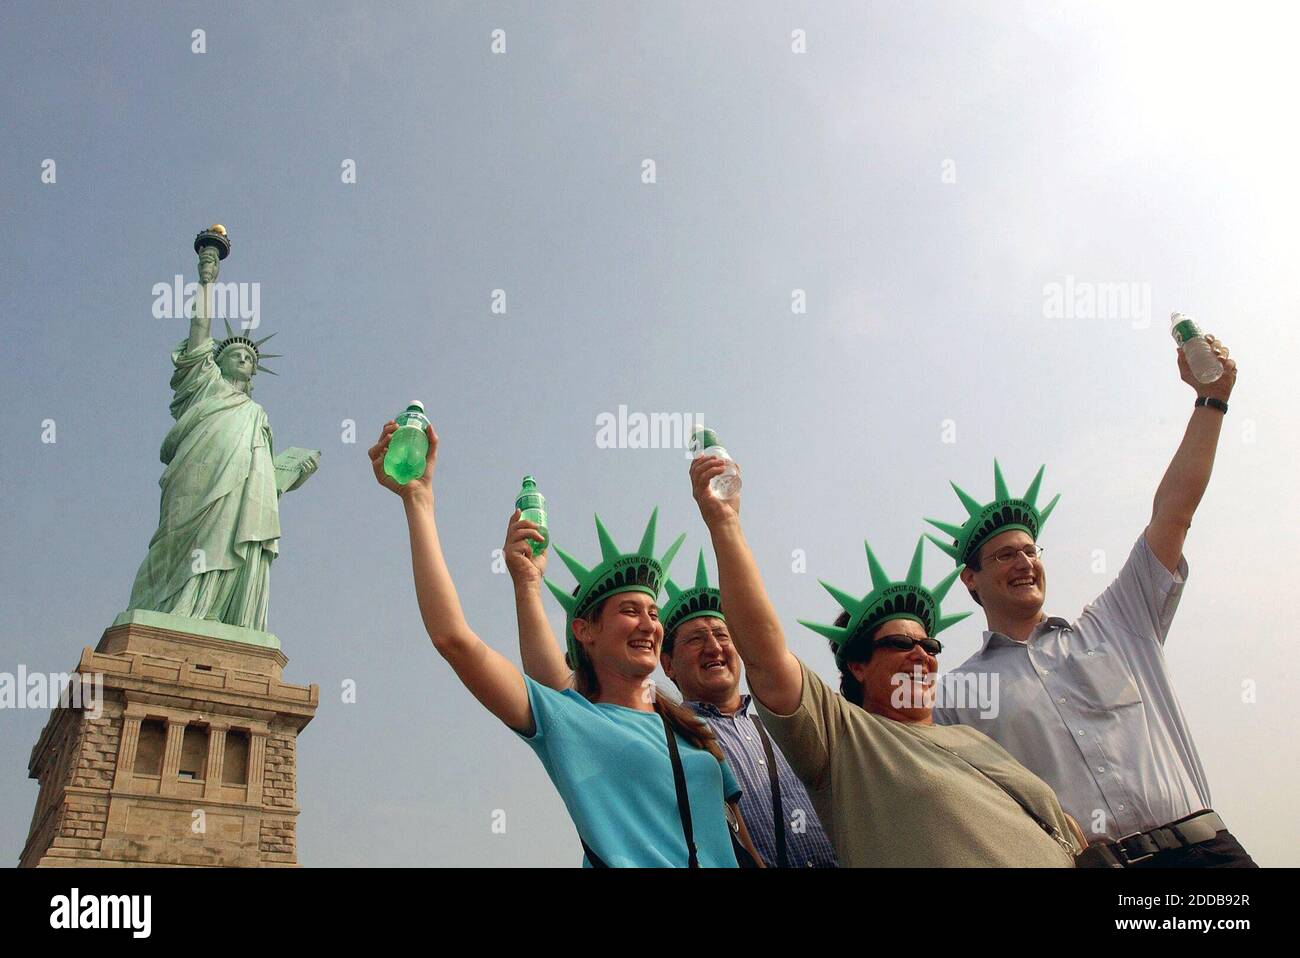 NO FILM, NO VIDEO, NO TV, NO DOCUMENTARY - The Tannast family from  Switzerland pose in front of the Statue of Liberty as it opens to tourists  for the first time on